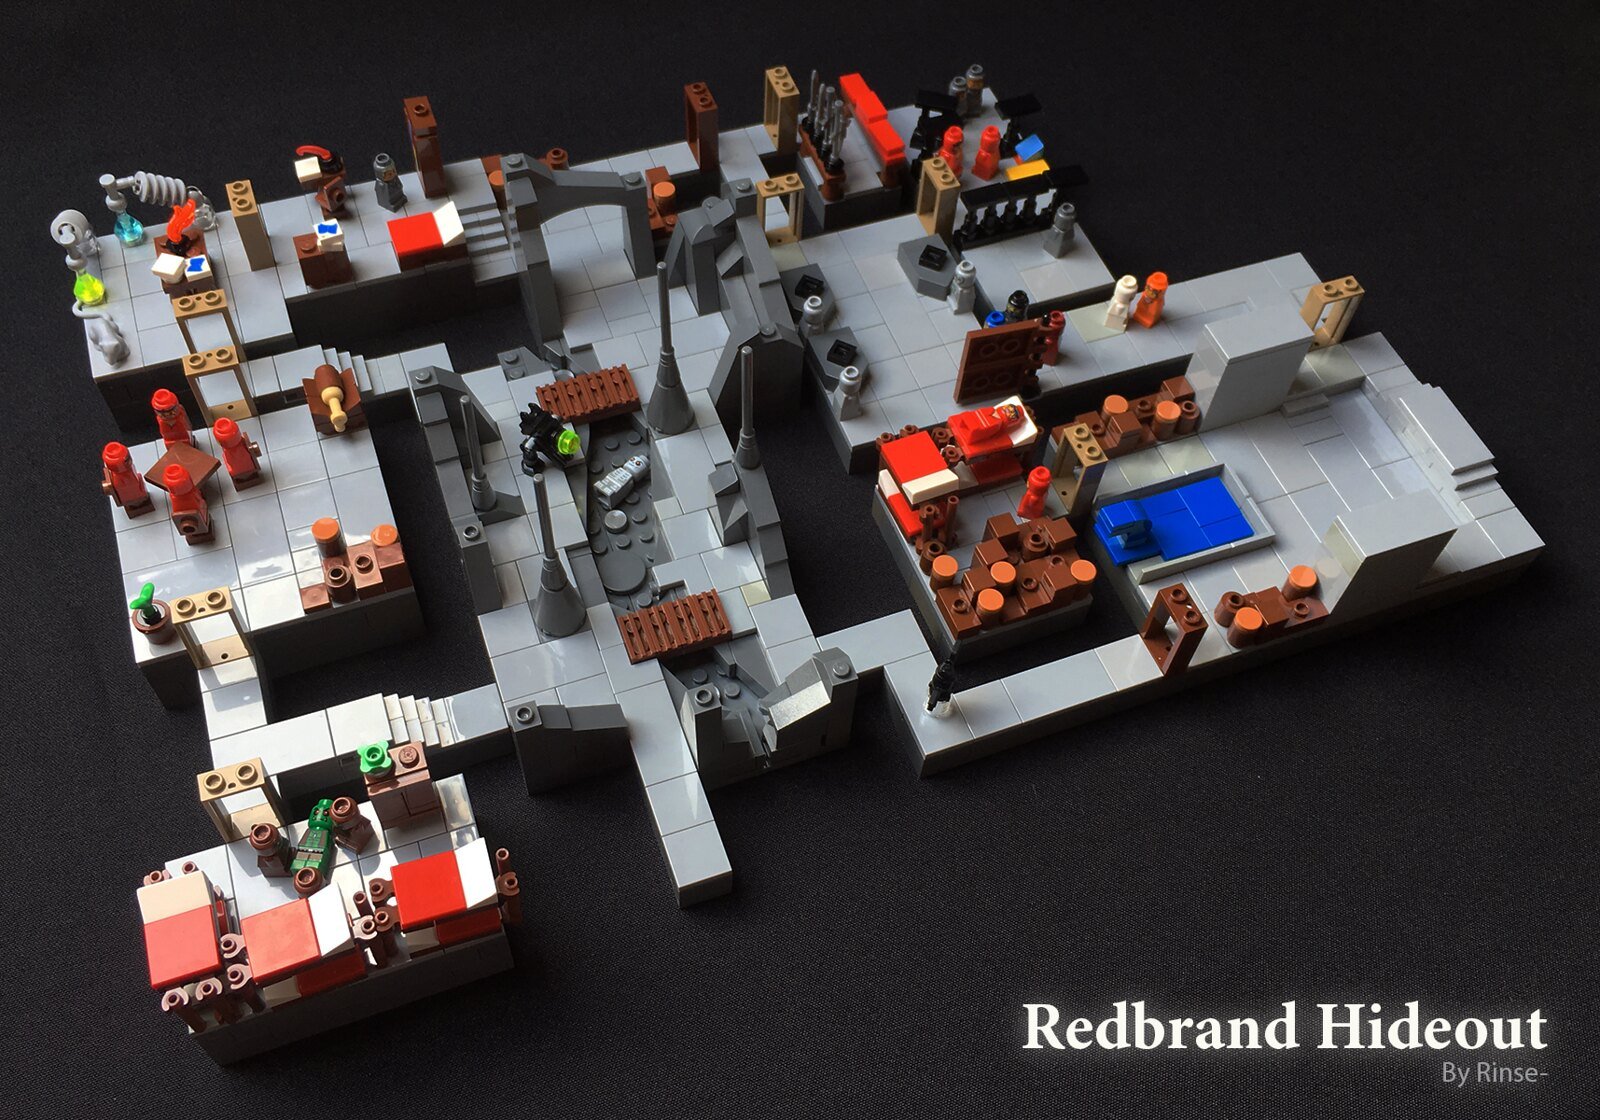 LEGO Dungeons & Build for Initiative - BrickNerd - All things LEGO and the LEGO fan community